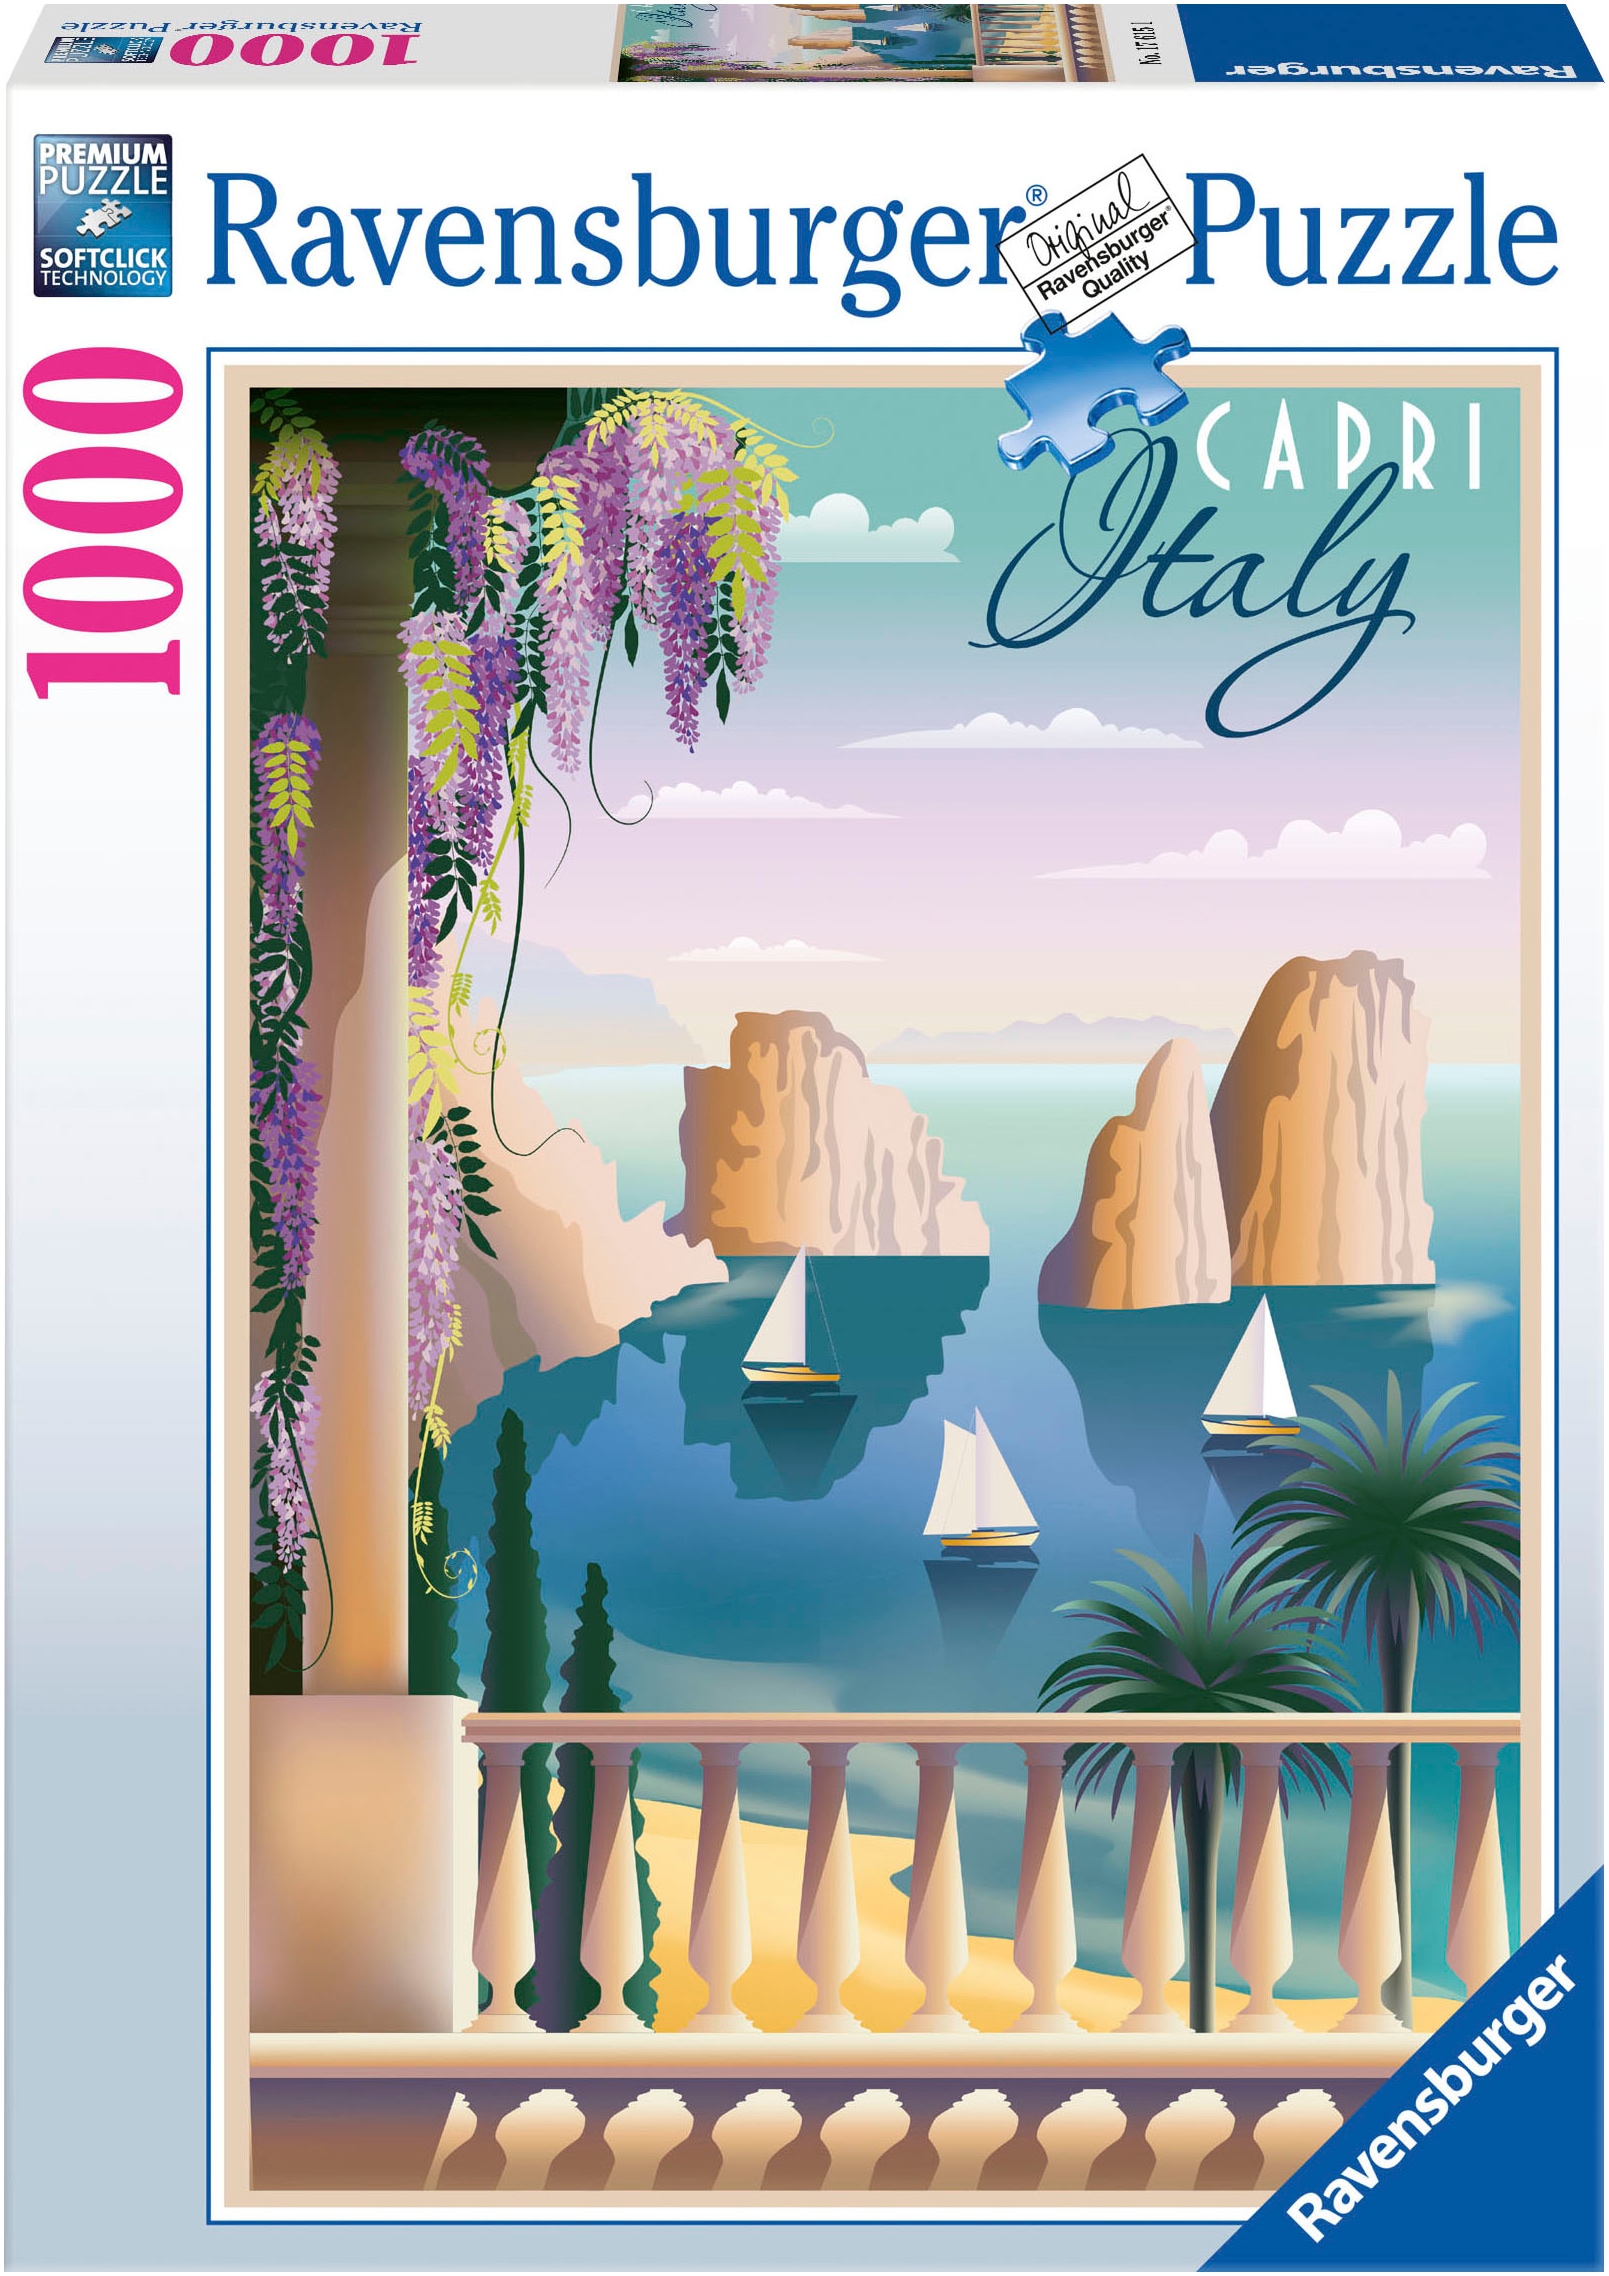 Ravensburger Puzzle »Postcard from Capri, Italy«, Made in Germany, FSC® - schützt Wald - weltweit